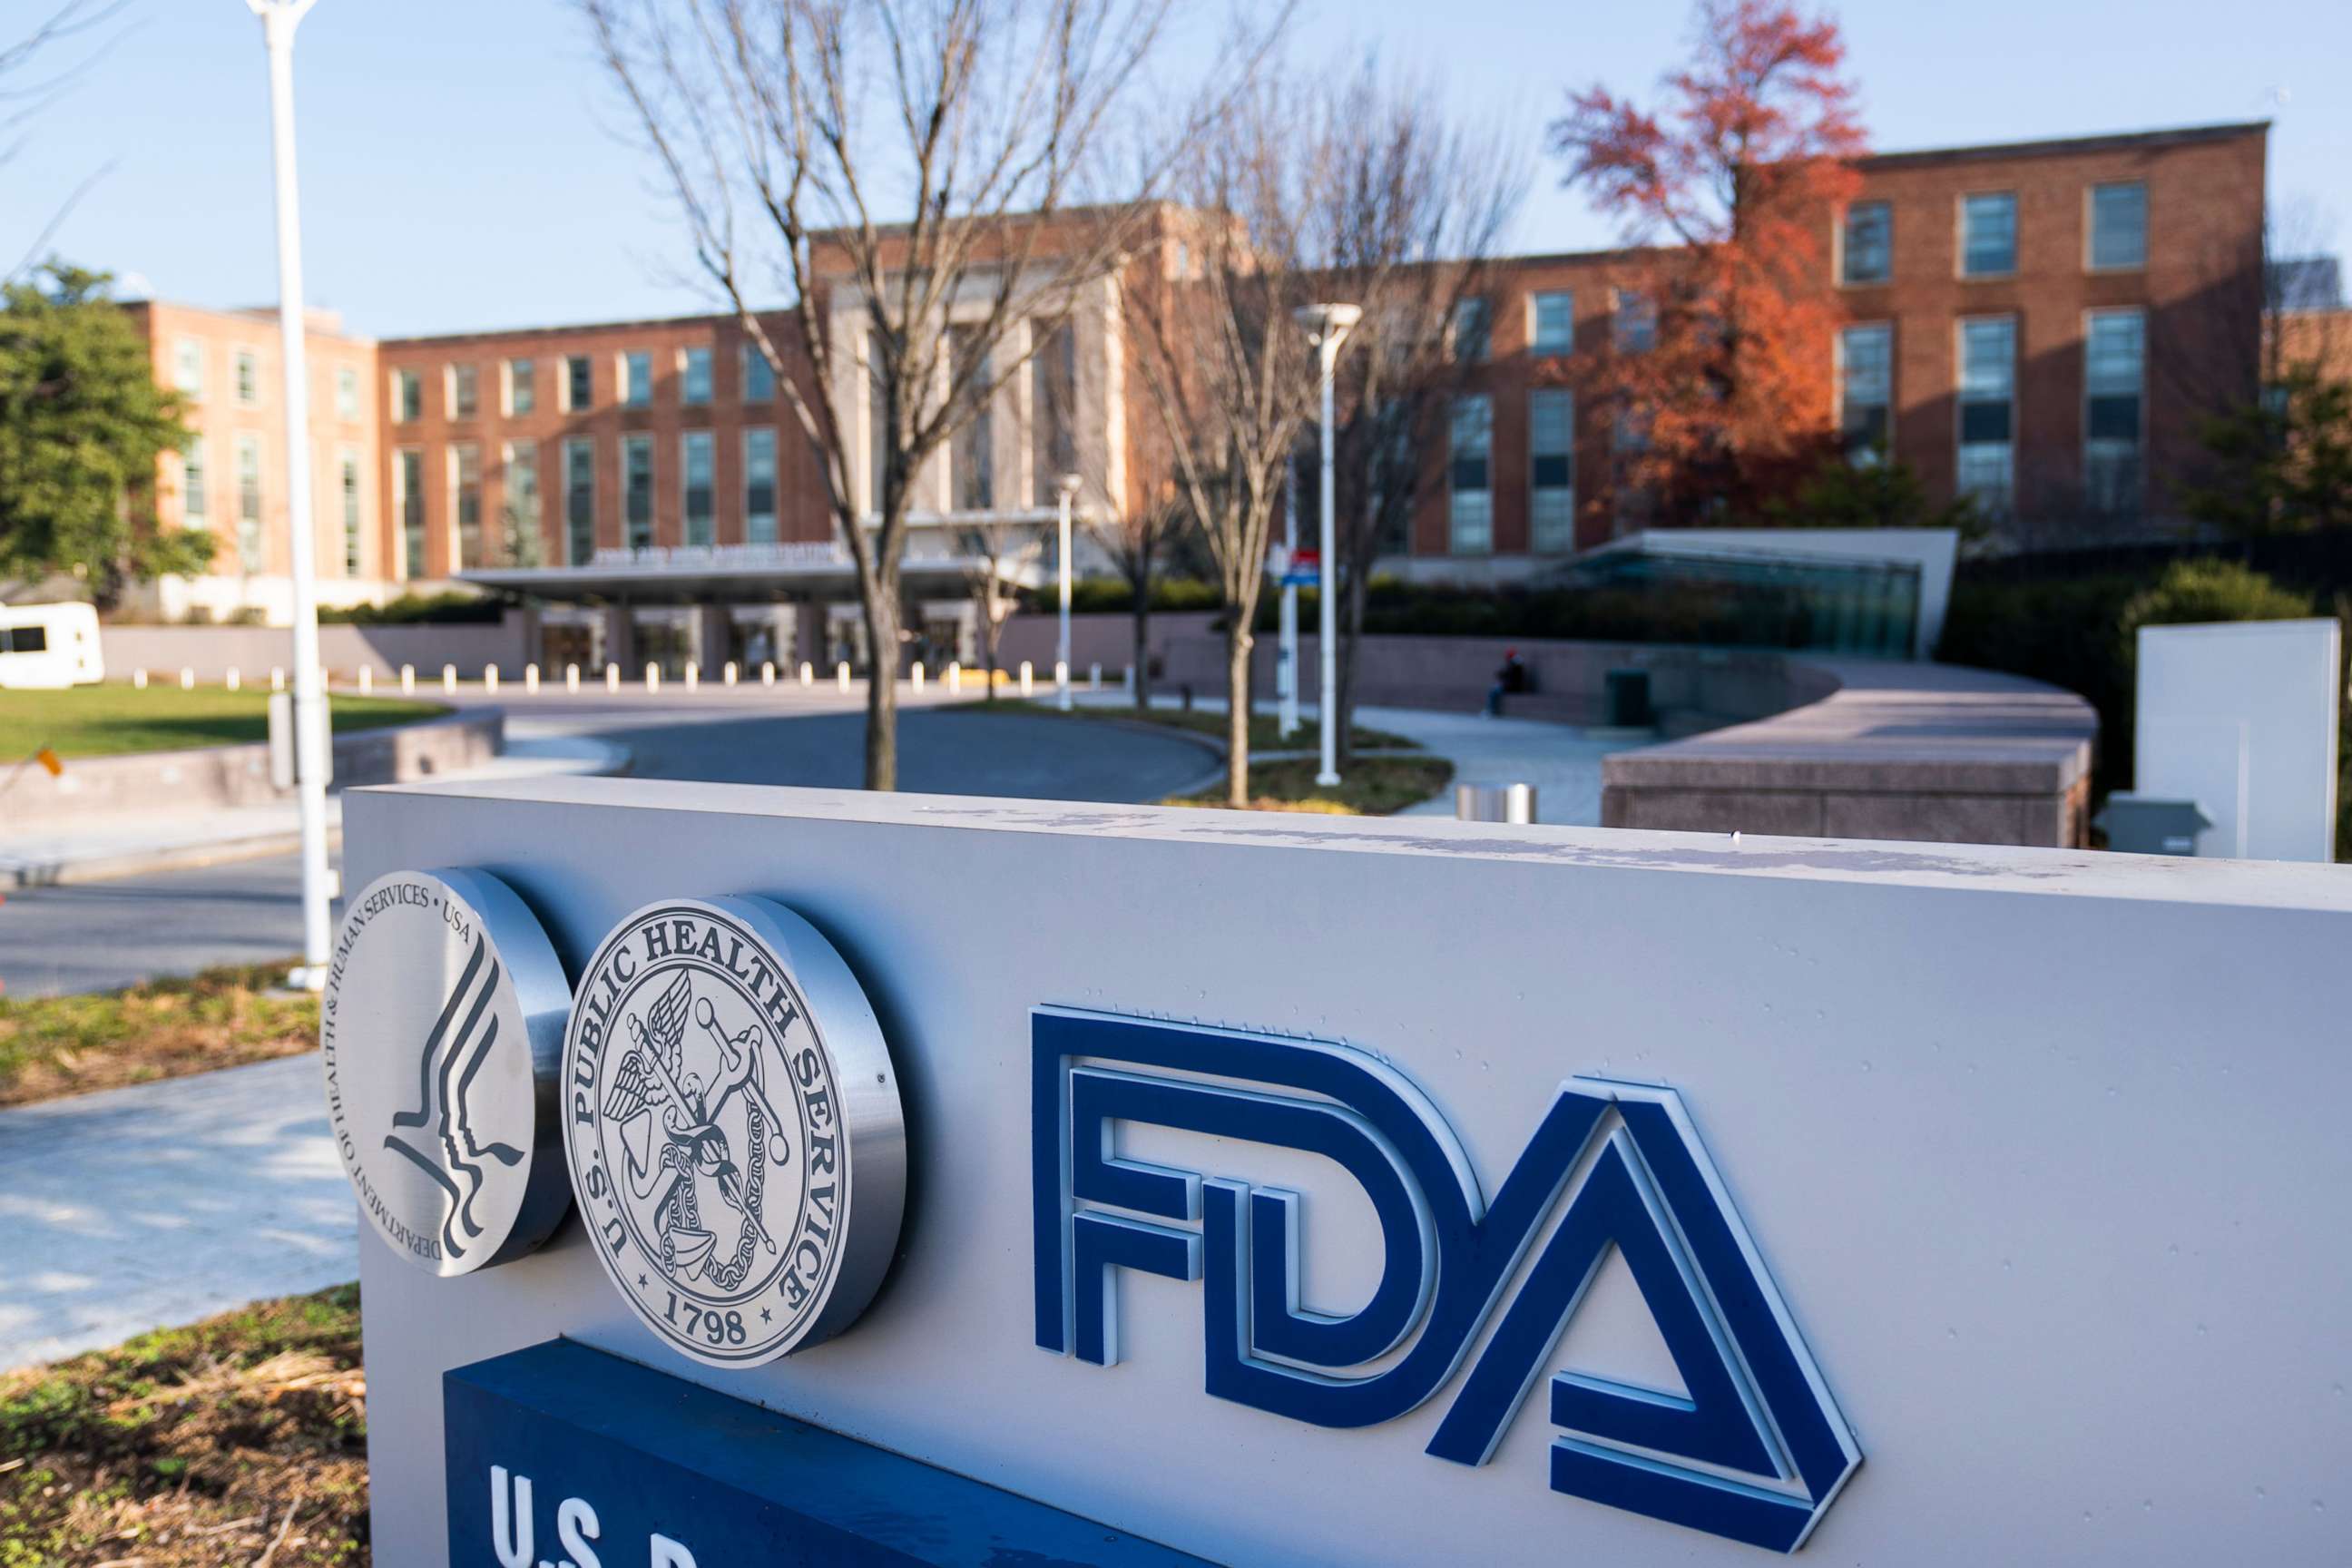 PHOTO: The United States Food and Drug Administration (FDA) headquarters is shown in Silver Spring, Md., Dec. 10, 2020.